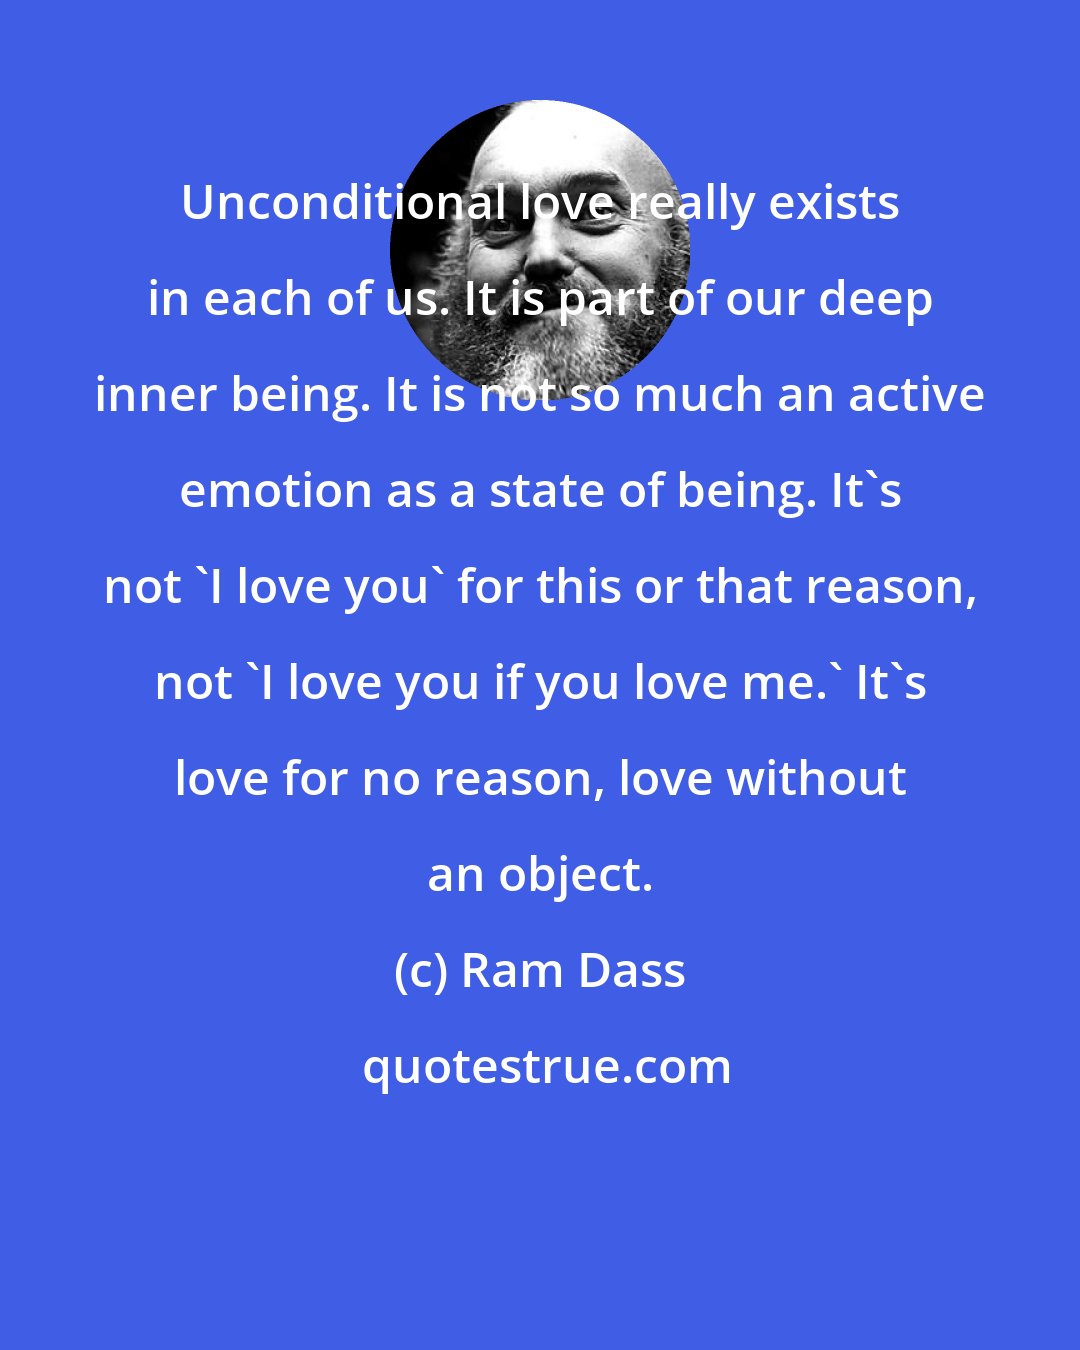 Ram Dass: Unconditional love really exists in each of us. It is part of our deep inner being. It is not so much an active emotion as a state of being. It's not 'I love you' for this or that reason, not 'I love you if you love me.' It's love for no reason, love without an object.